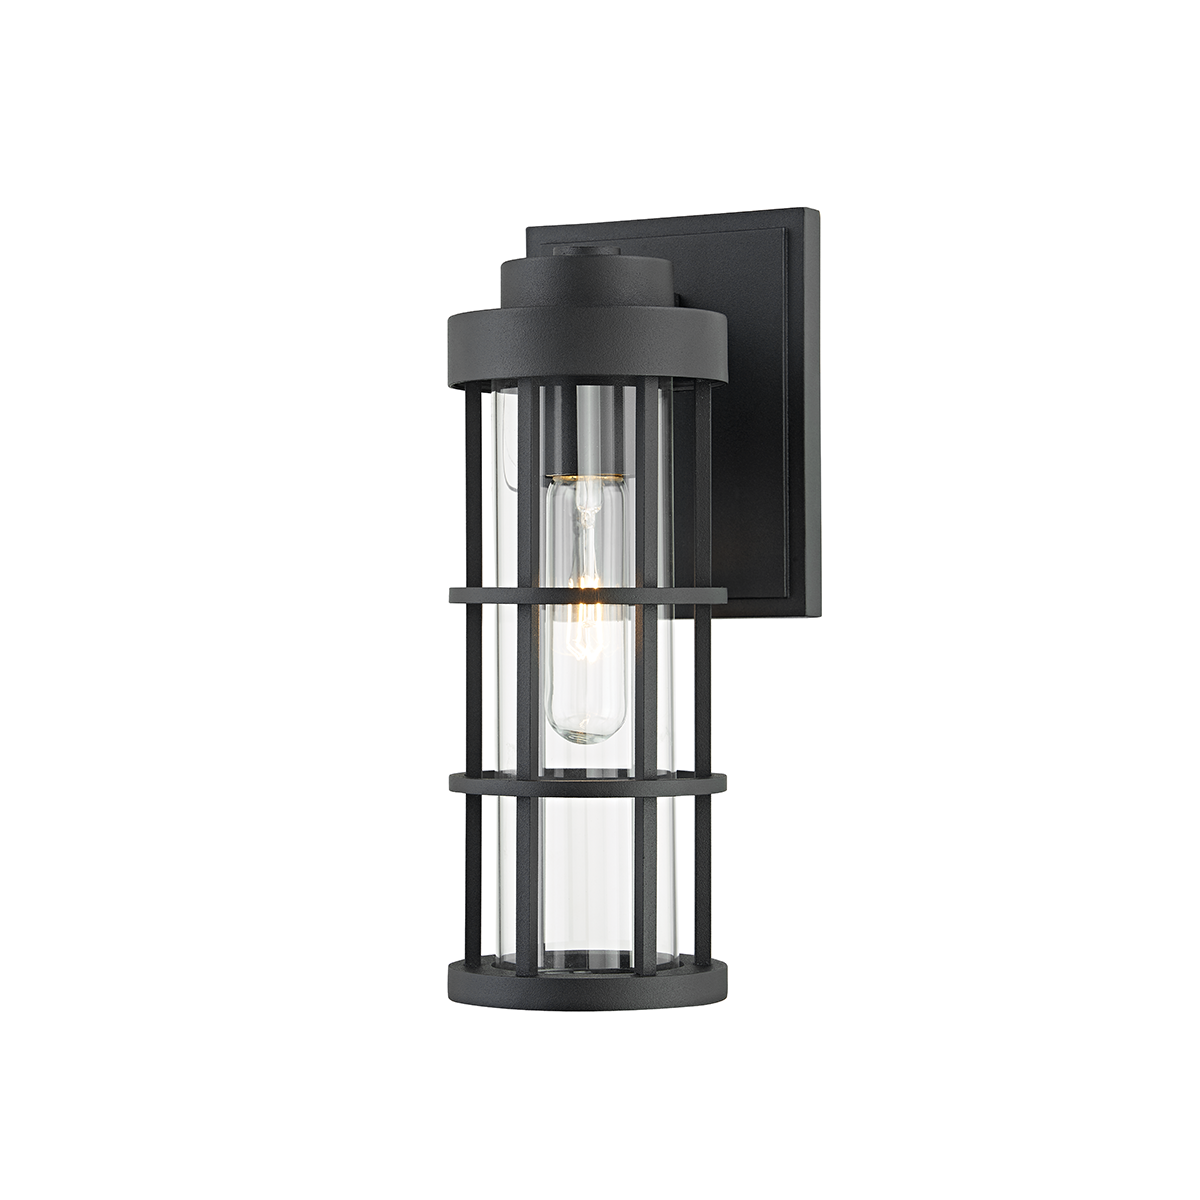 Troy Lighting 1 LIGHT SMALL EXTERIOR WALL SCONCE B2041